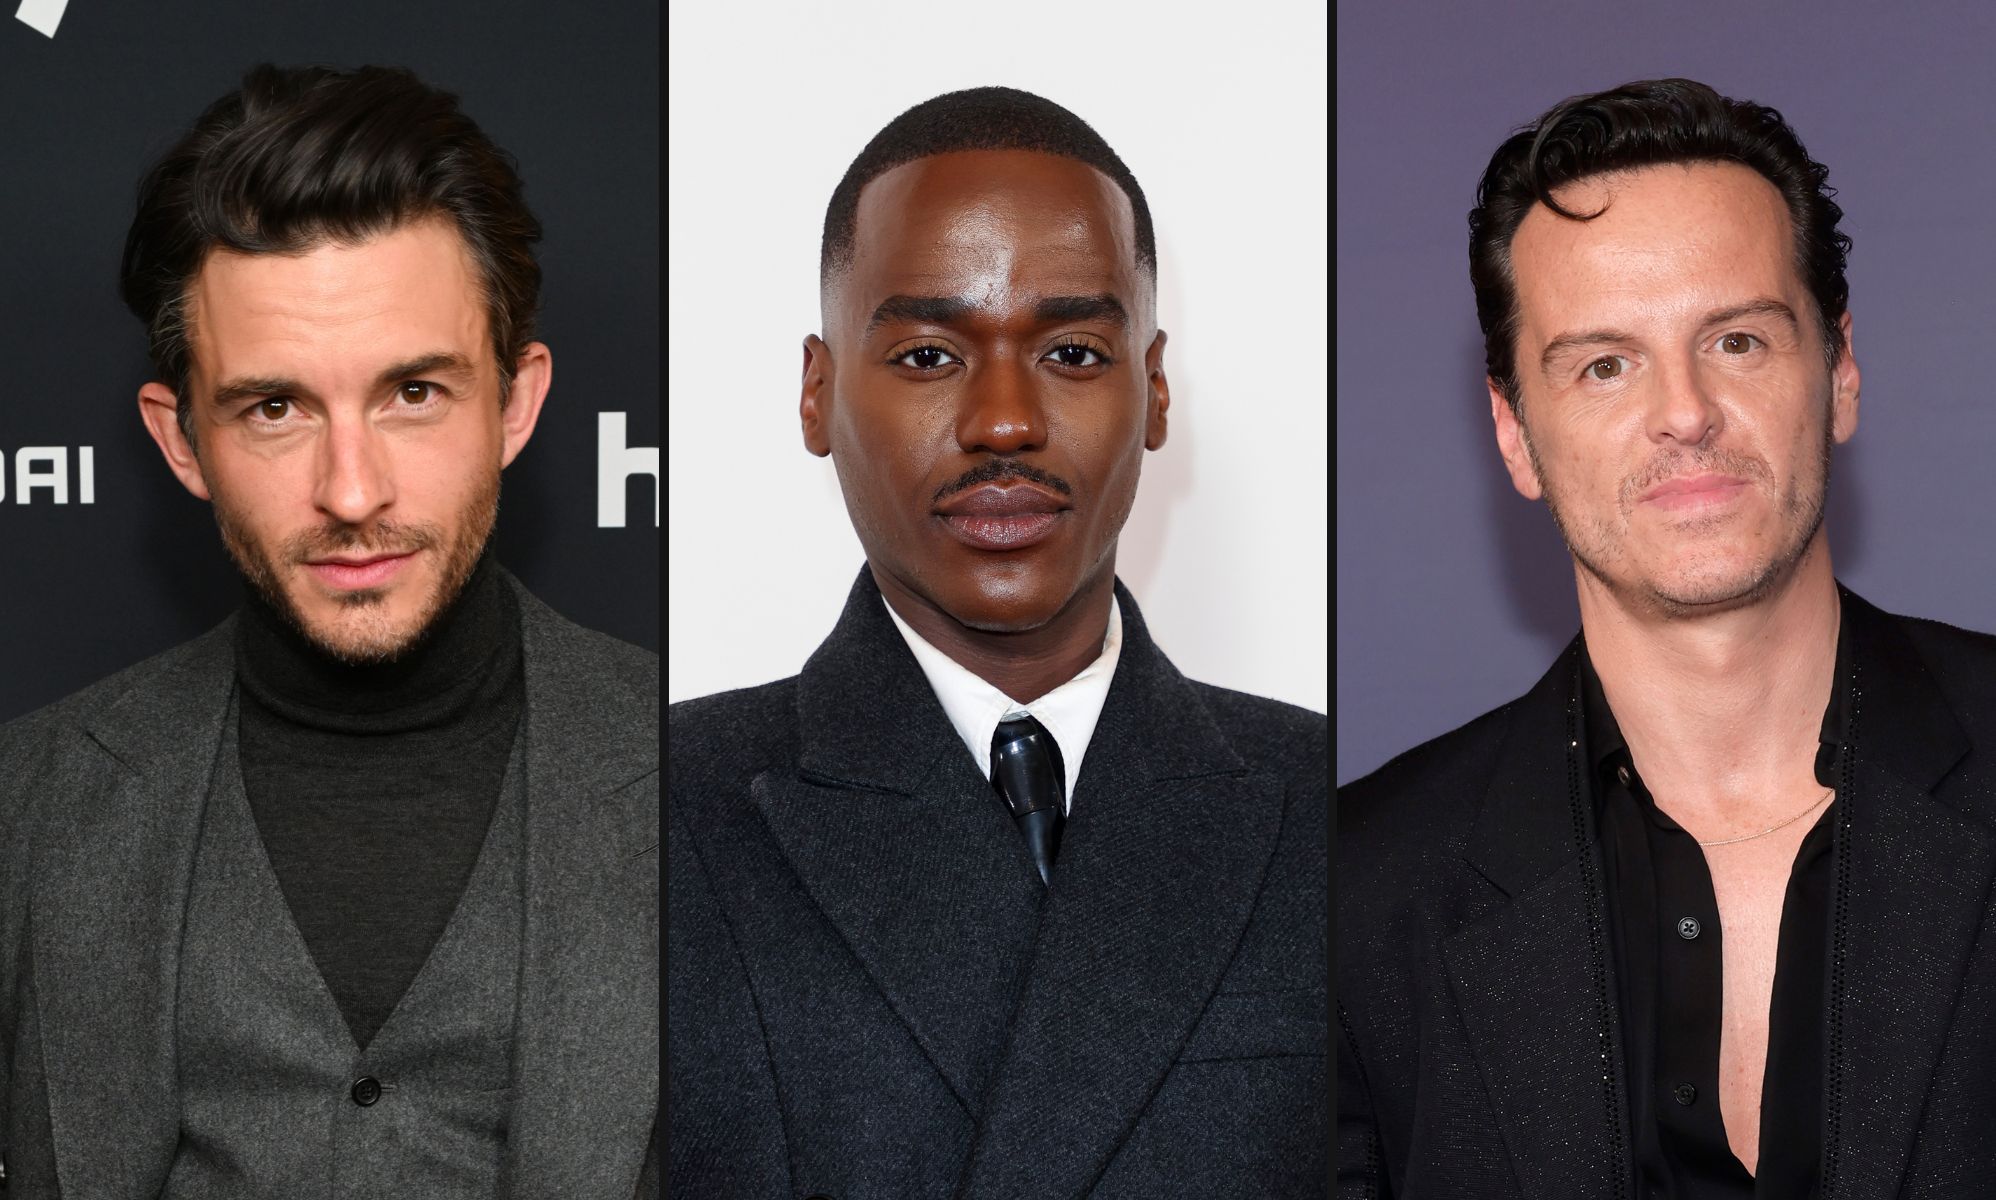 James Bond should played by one of these LGBTQ actors